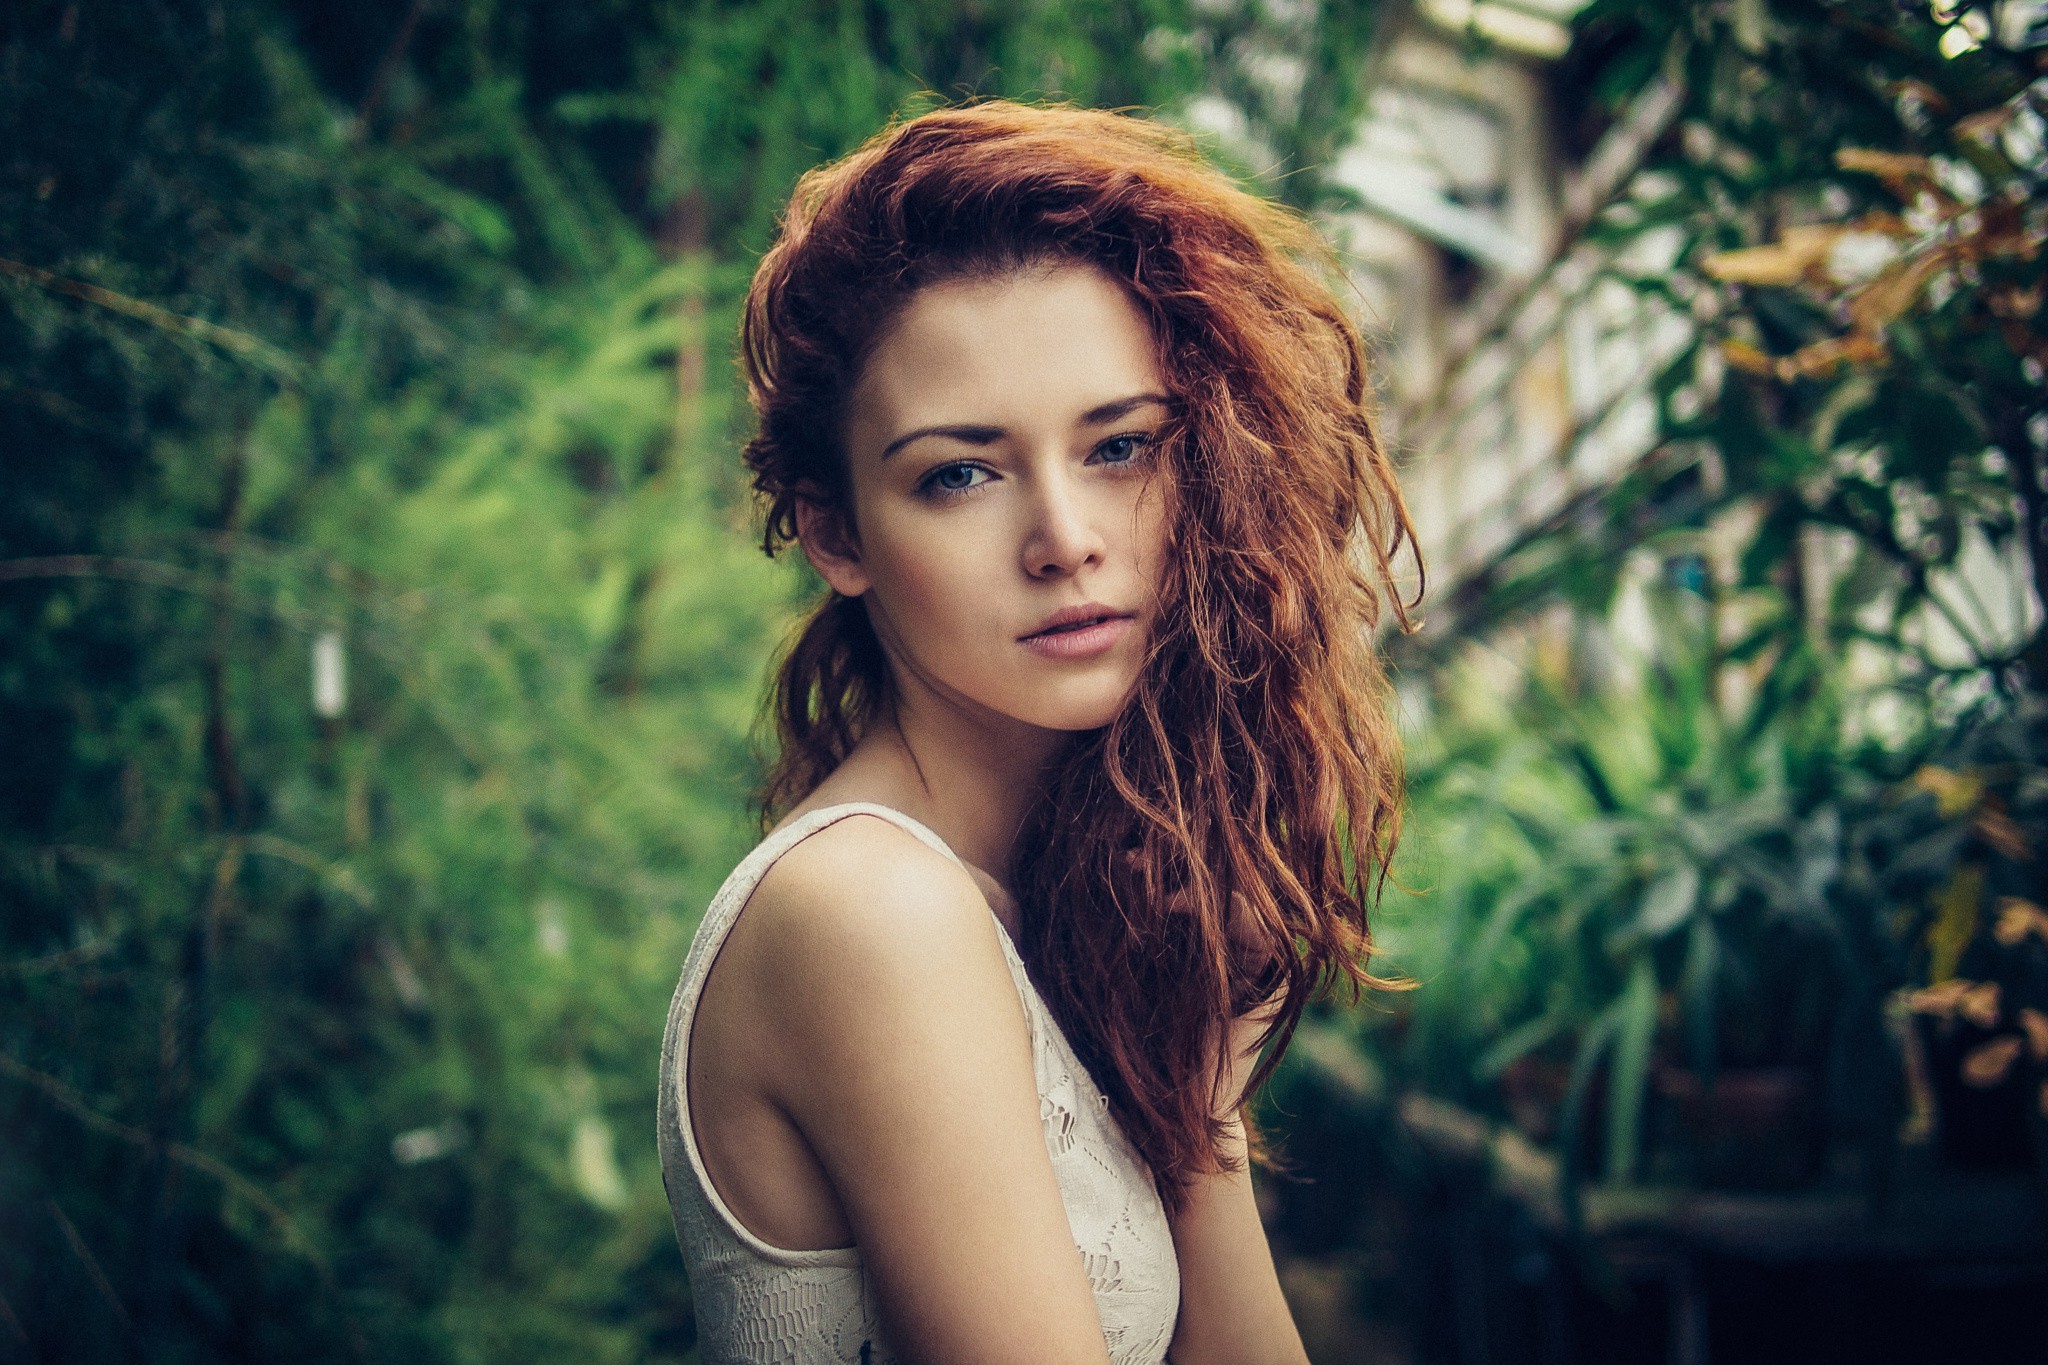 women, Redhead, Curly Hair, Looking At Viewer, Face, Plants, Greenhouse Wallpaper